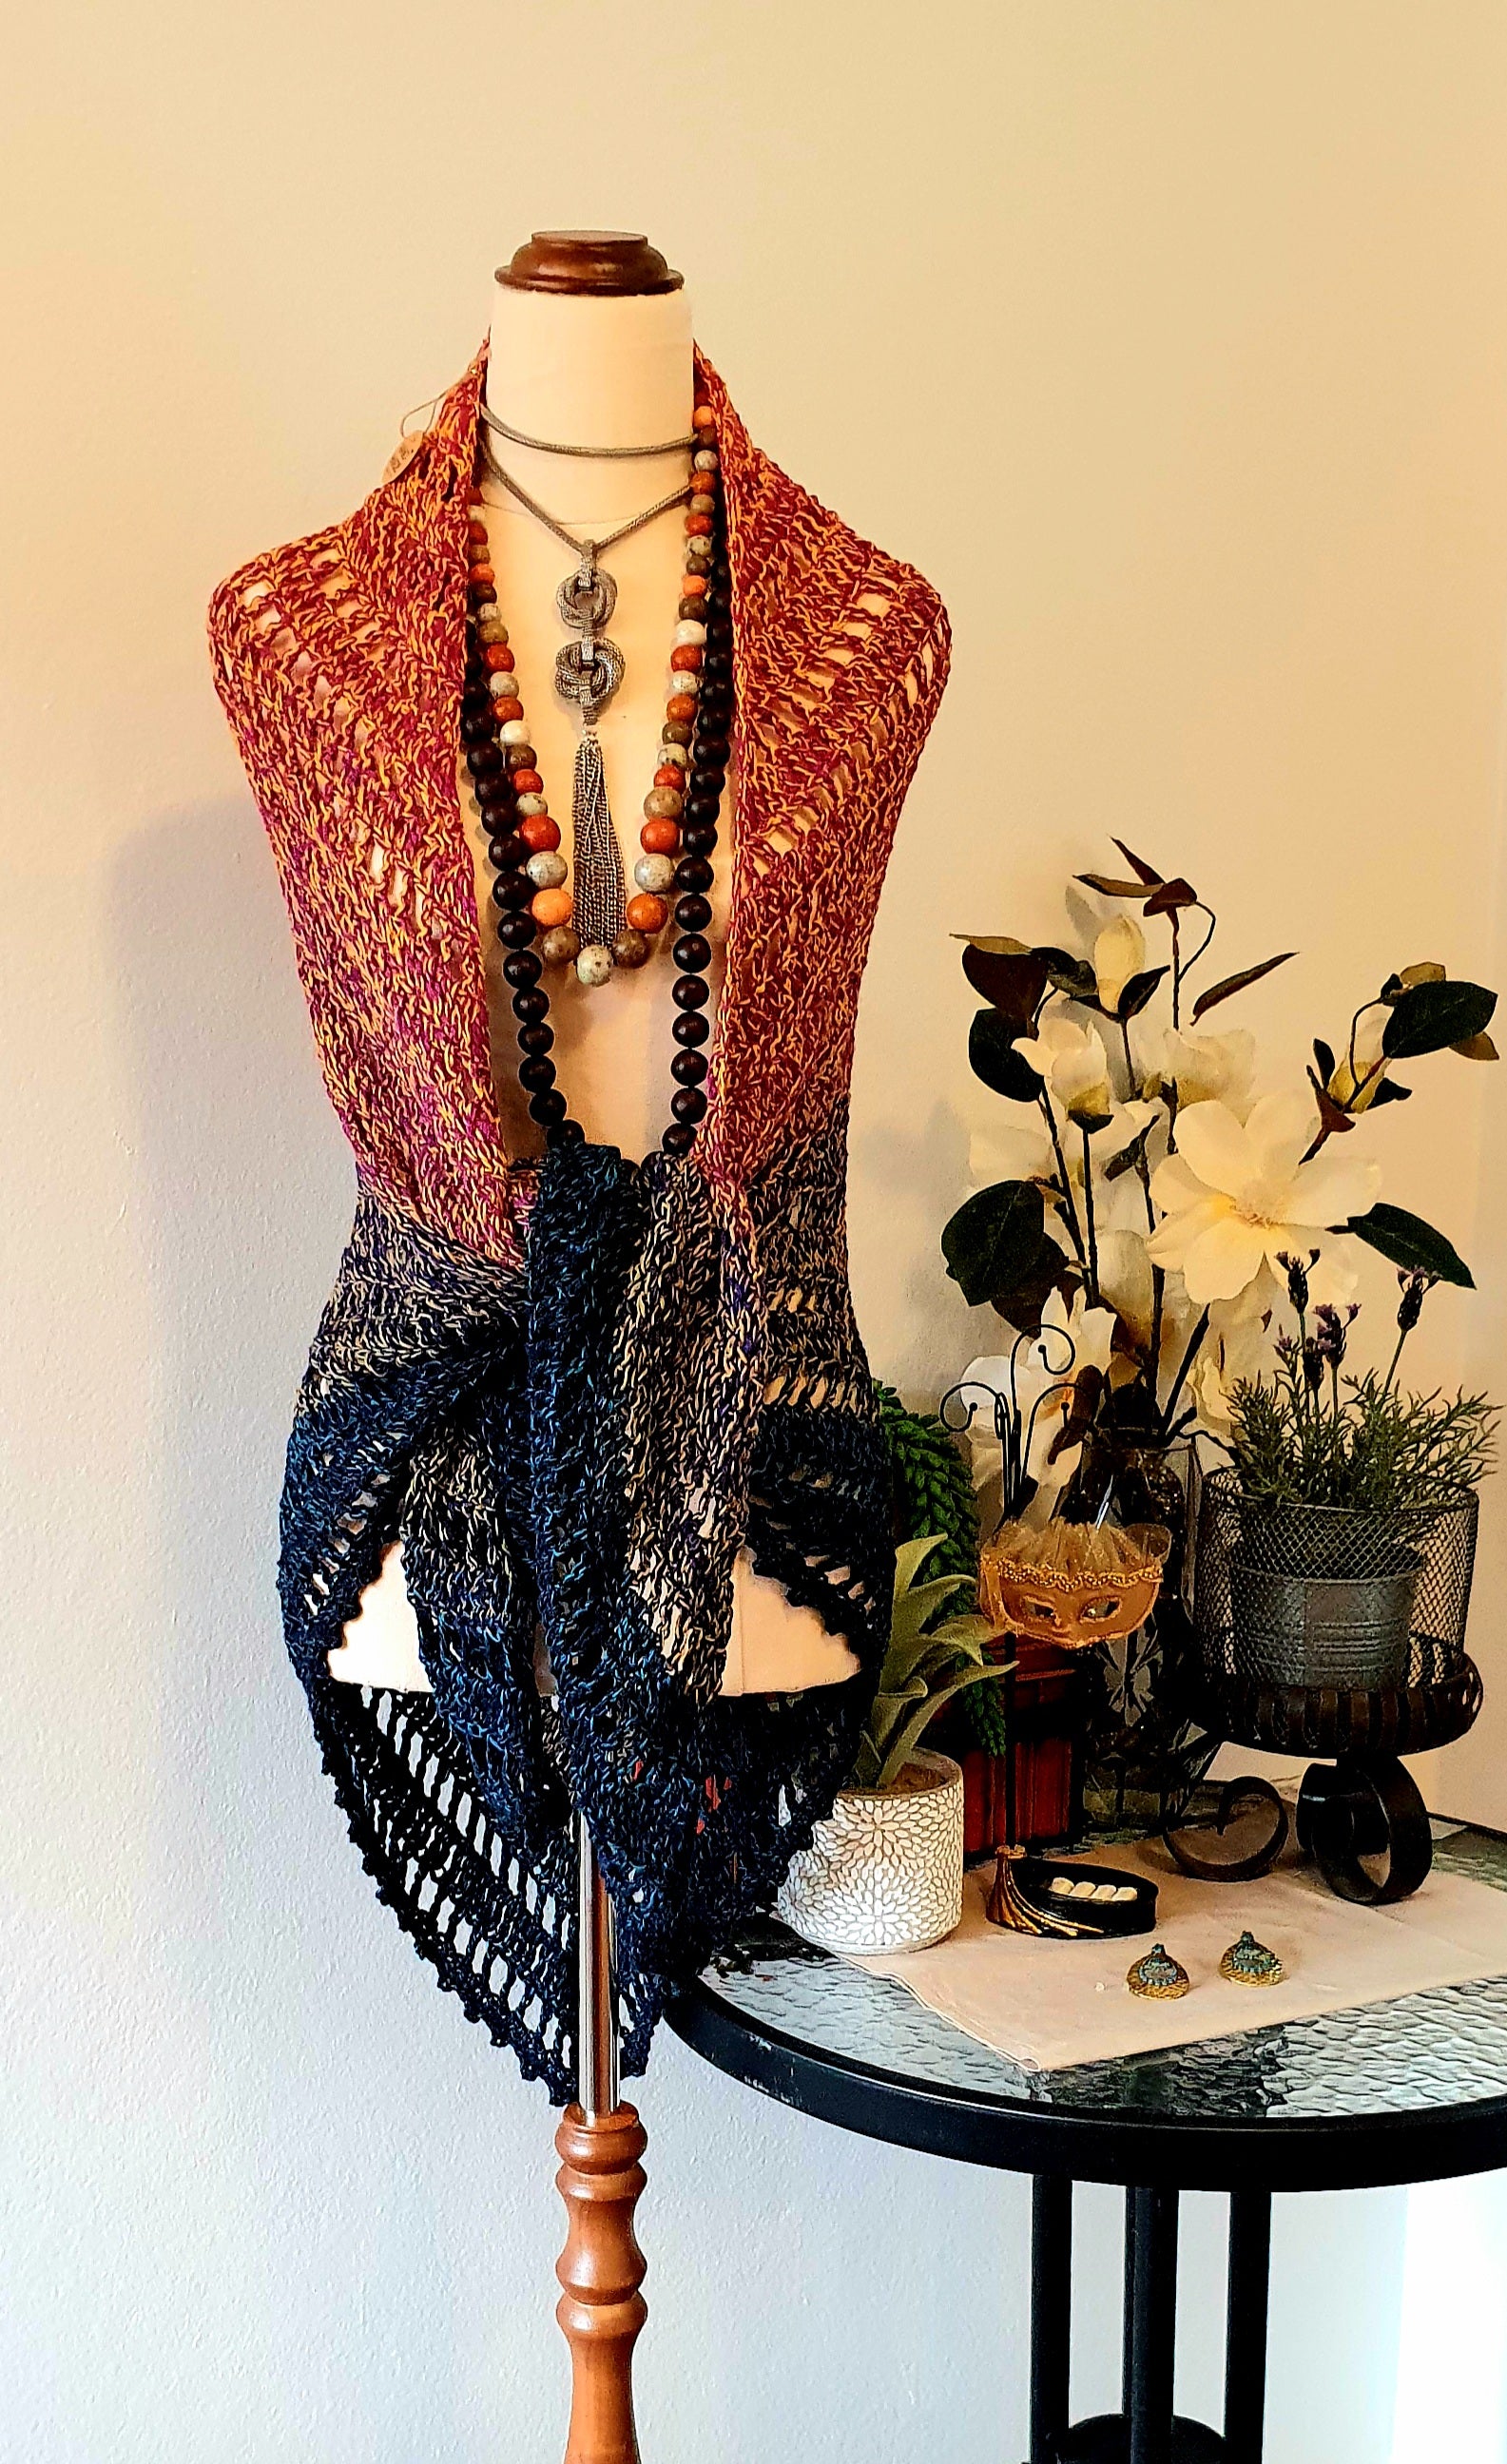 Handmade Crocheted Shawl - One Only